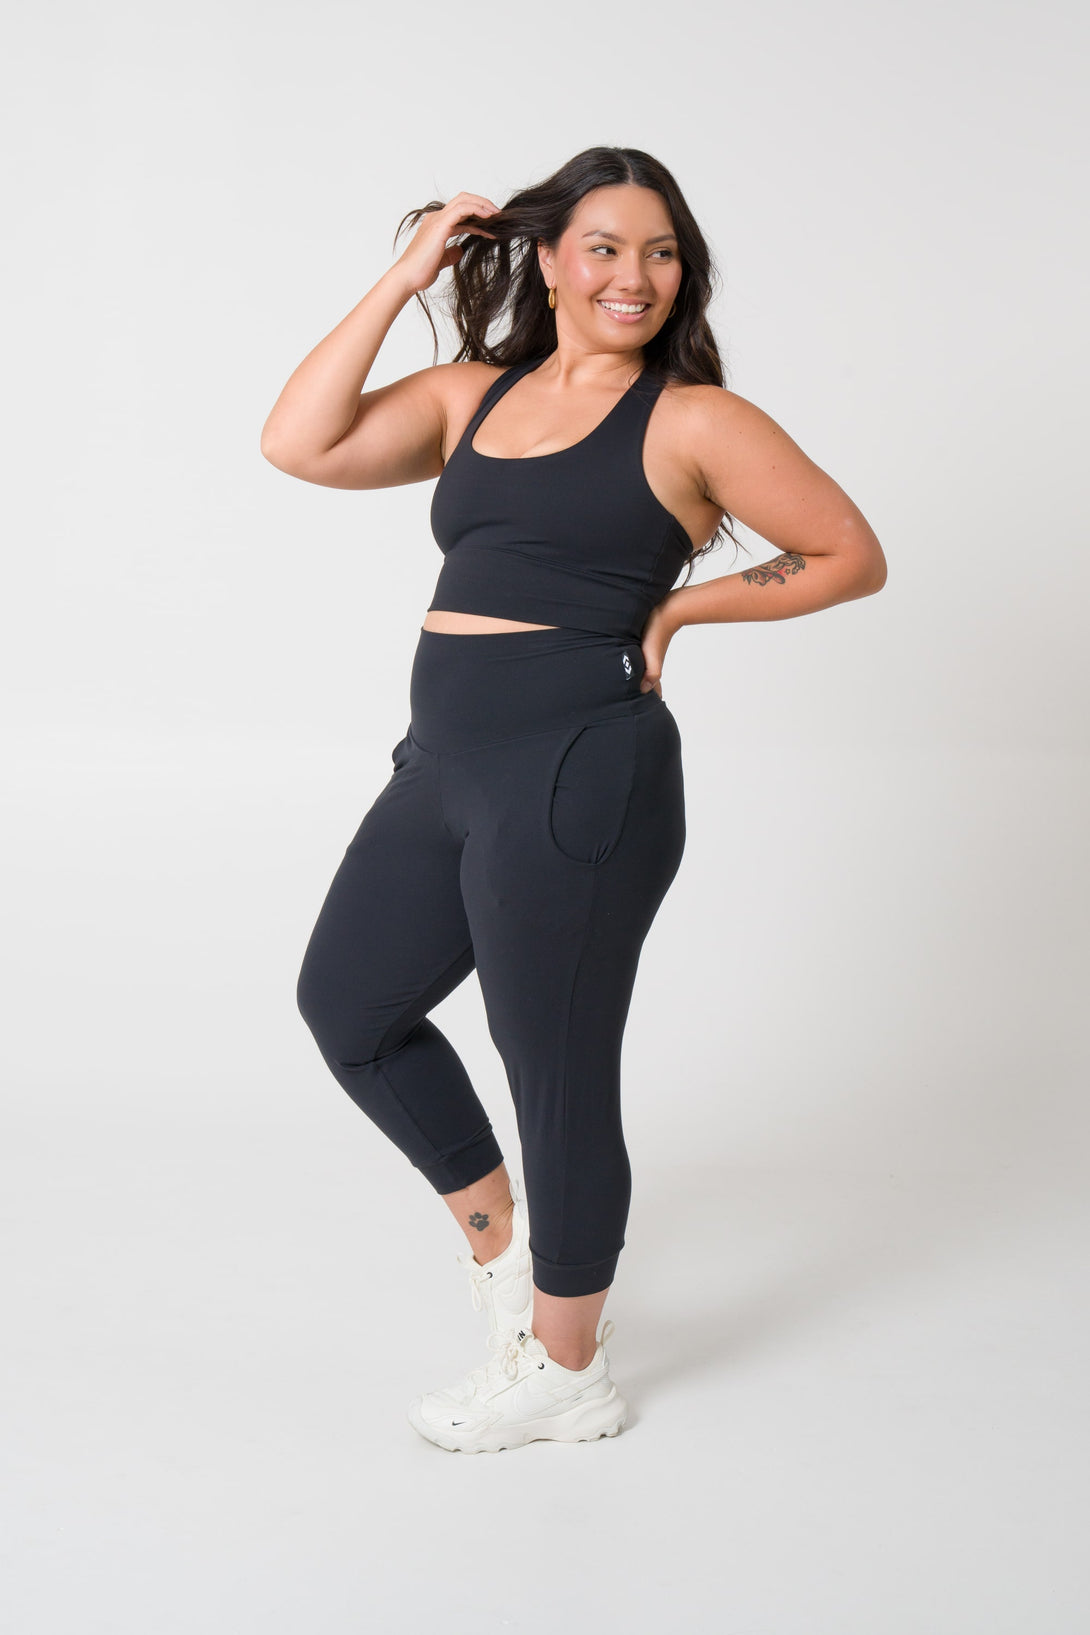 Black Soft to Touch - Jogger Capris w/ Pockets - Exoticathletica